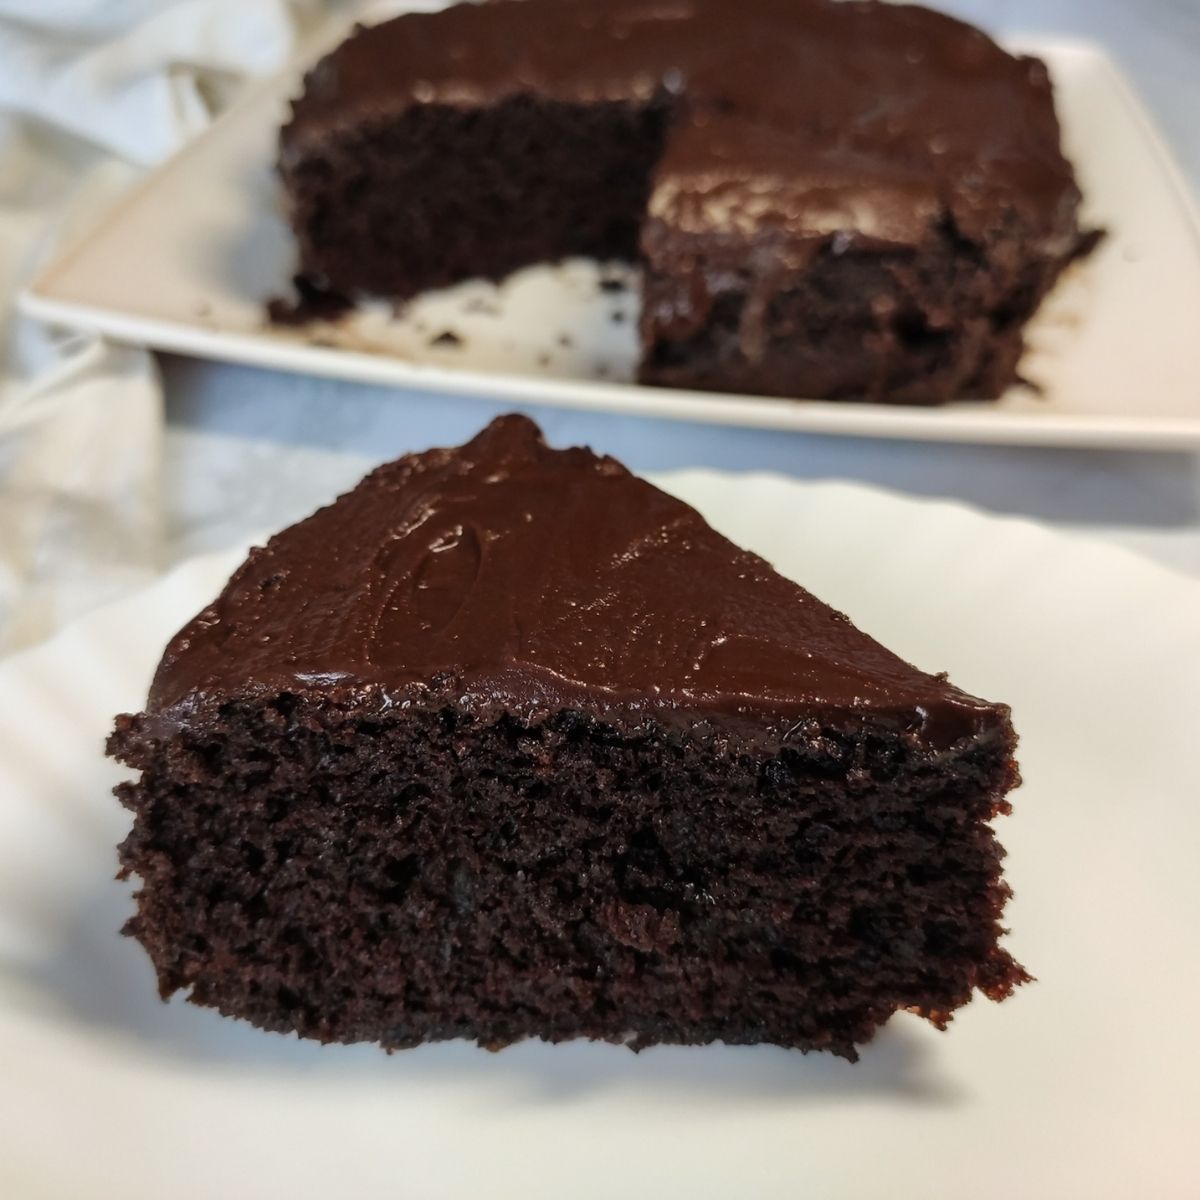 a slice of vegan chocolate cake served on a white plate more cake in the background